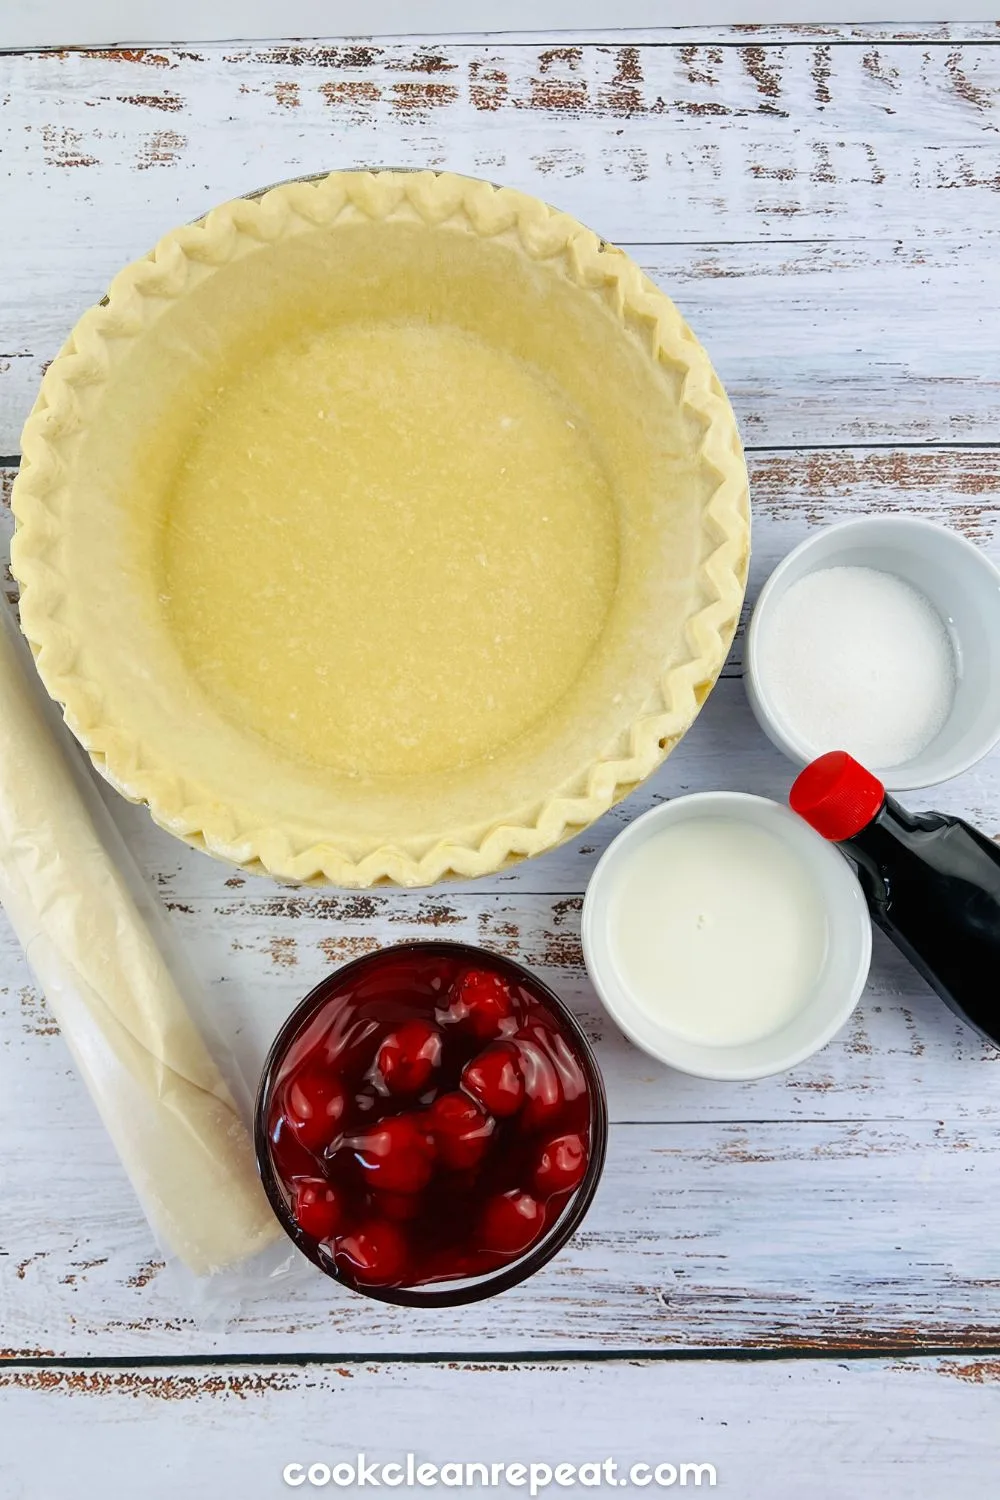 cherry pie recipe with canned filling ingredients